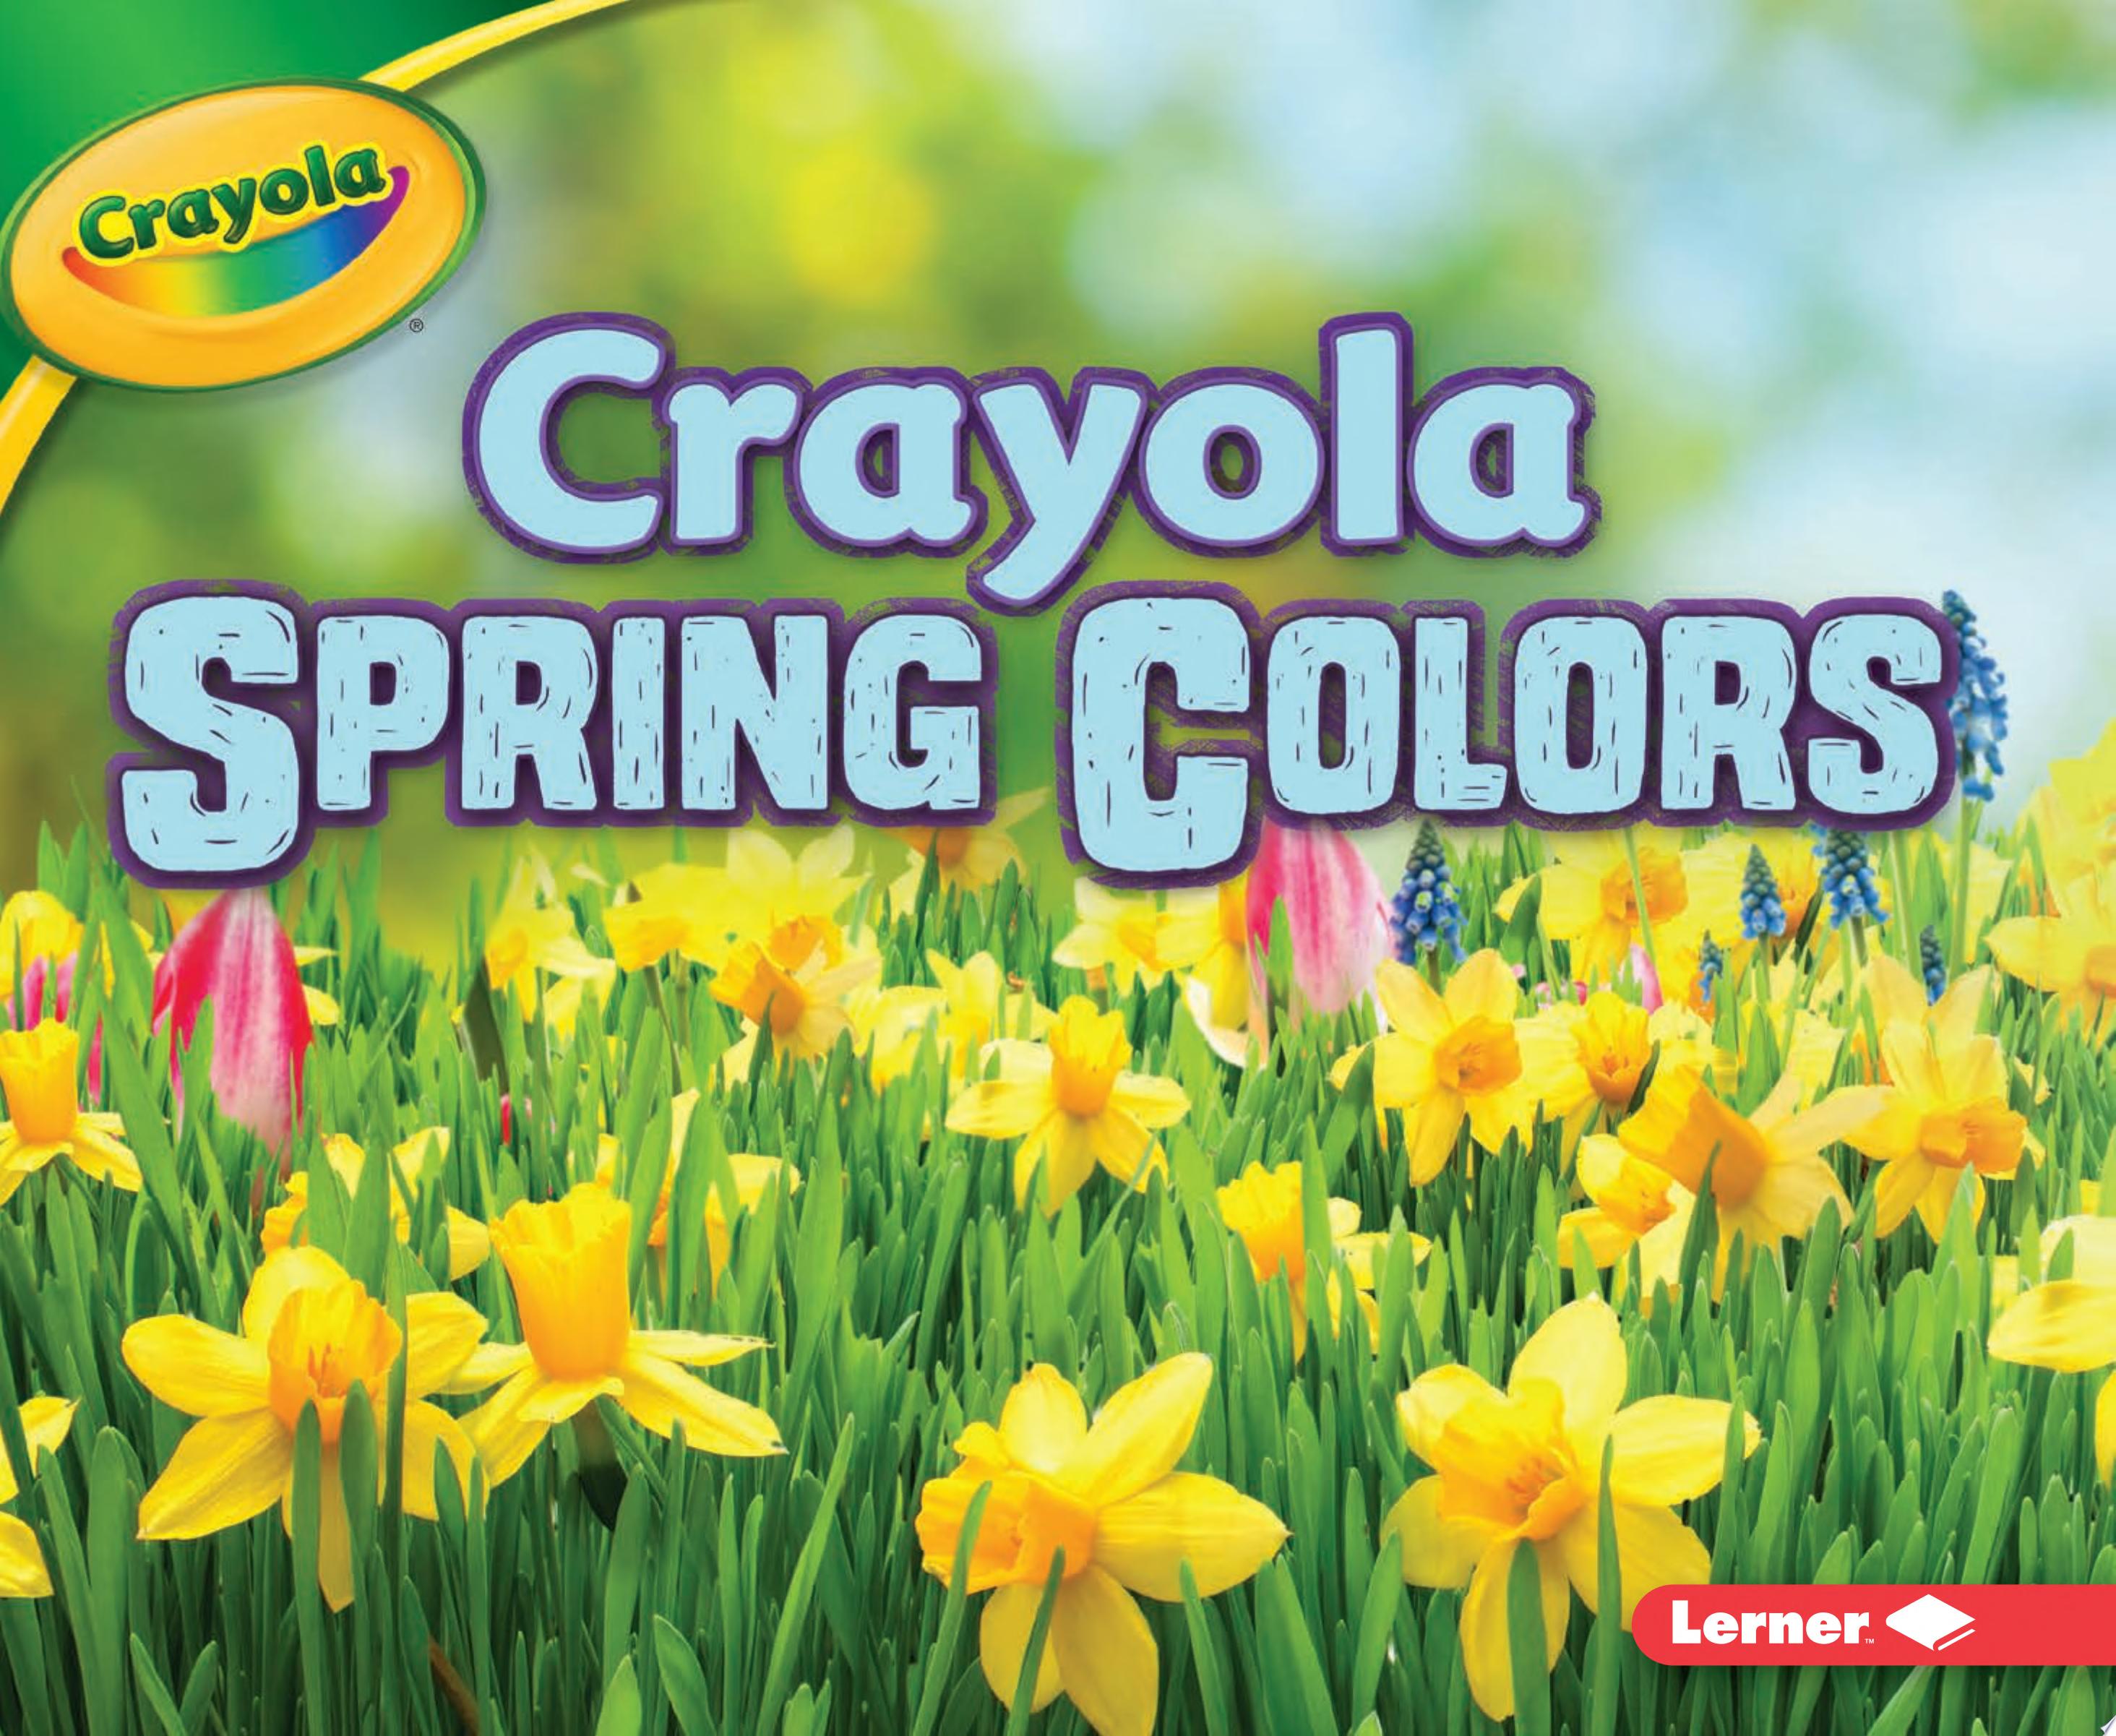 Image for "Crayola Spring Colors"